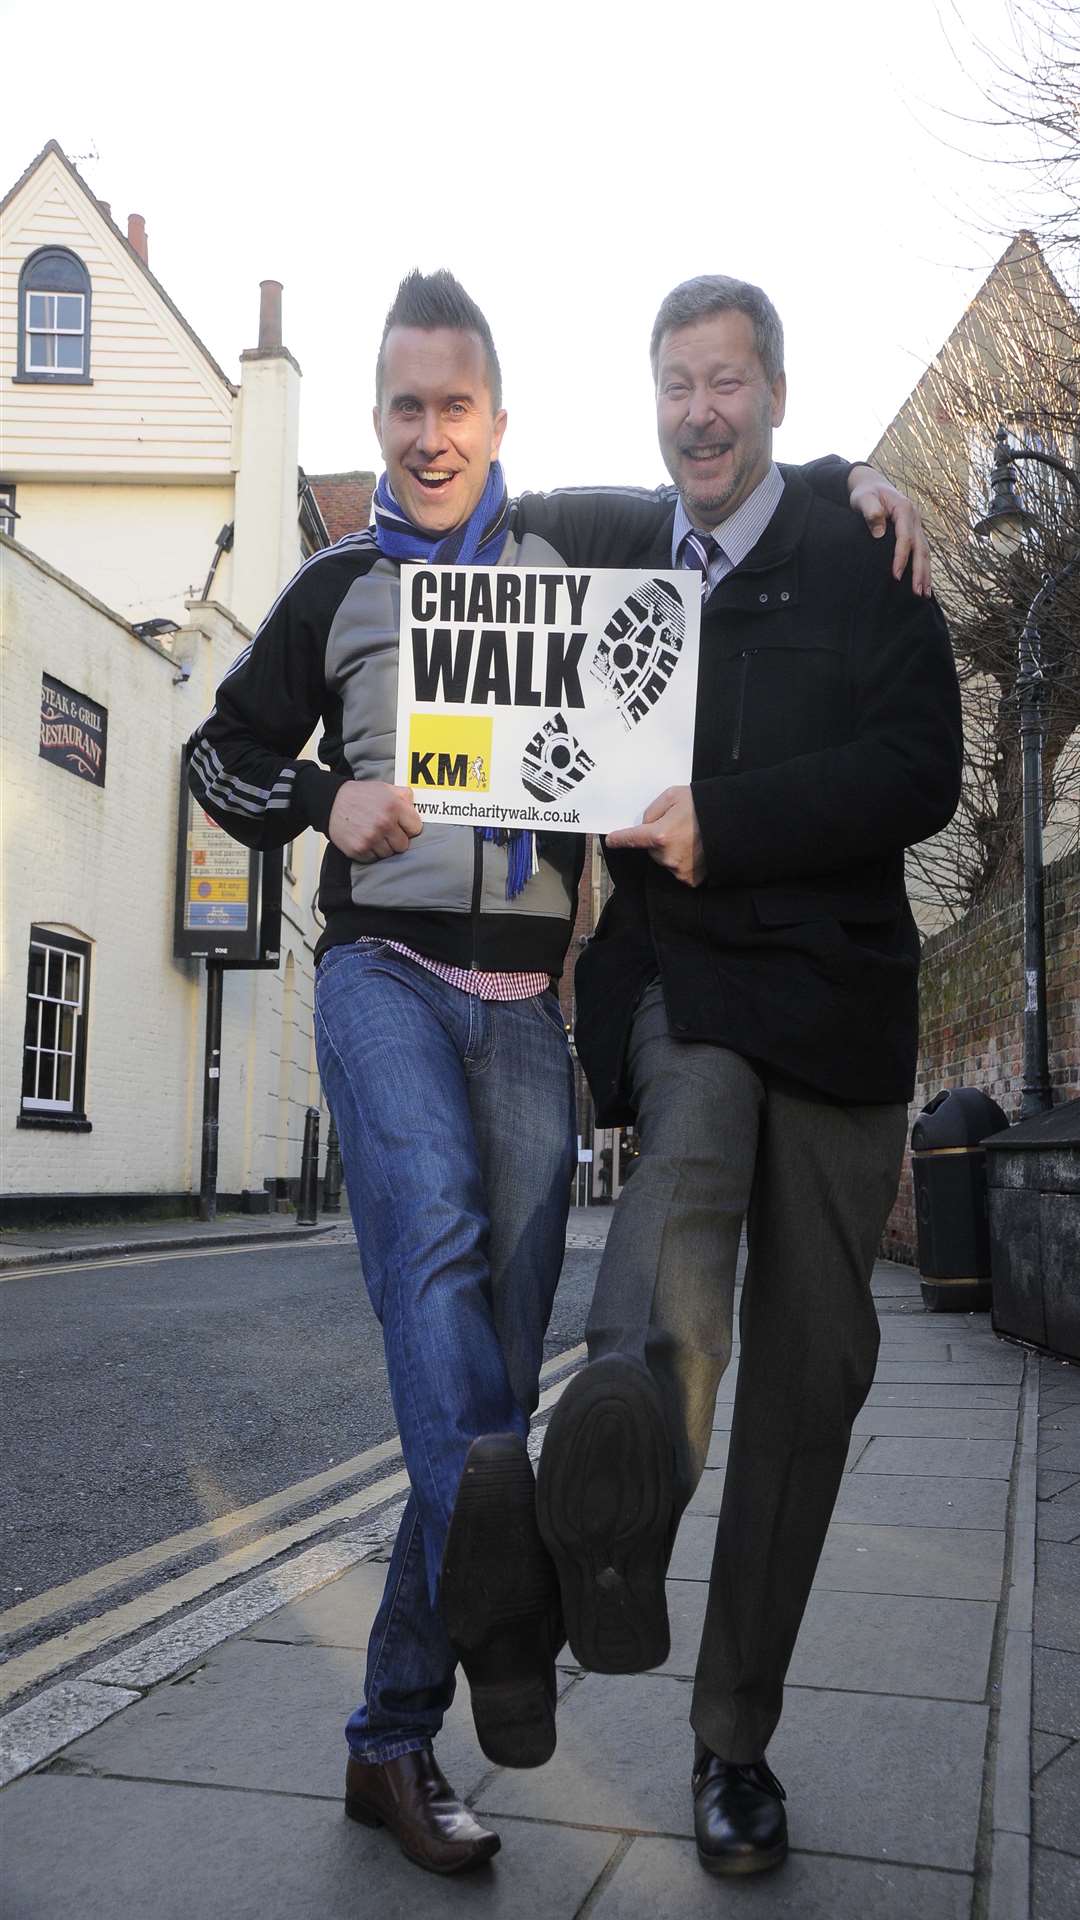 Phil 'Mister Maker' Gallagher steps out with Simon Dolby of the KM Charity Team to promote the KM Charity Walk on June 28.